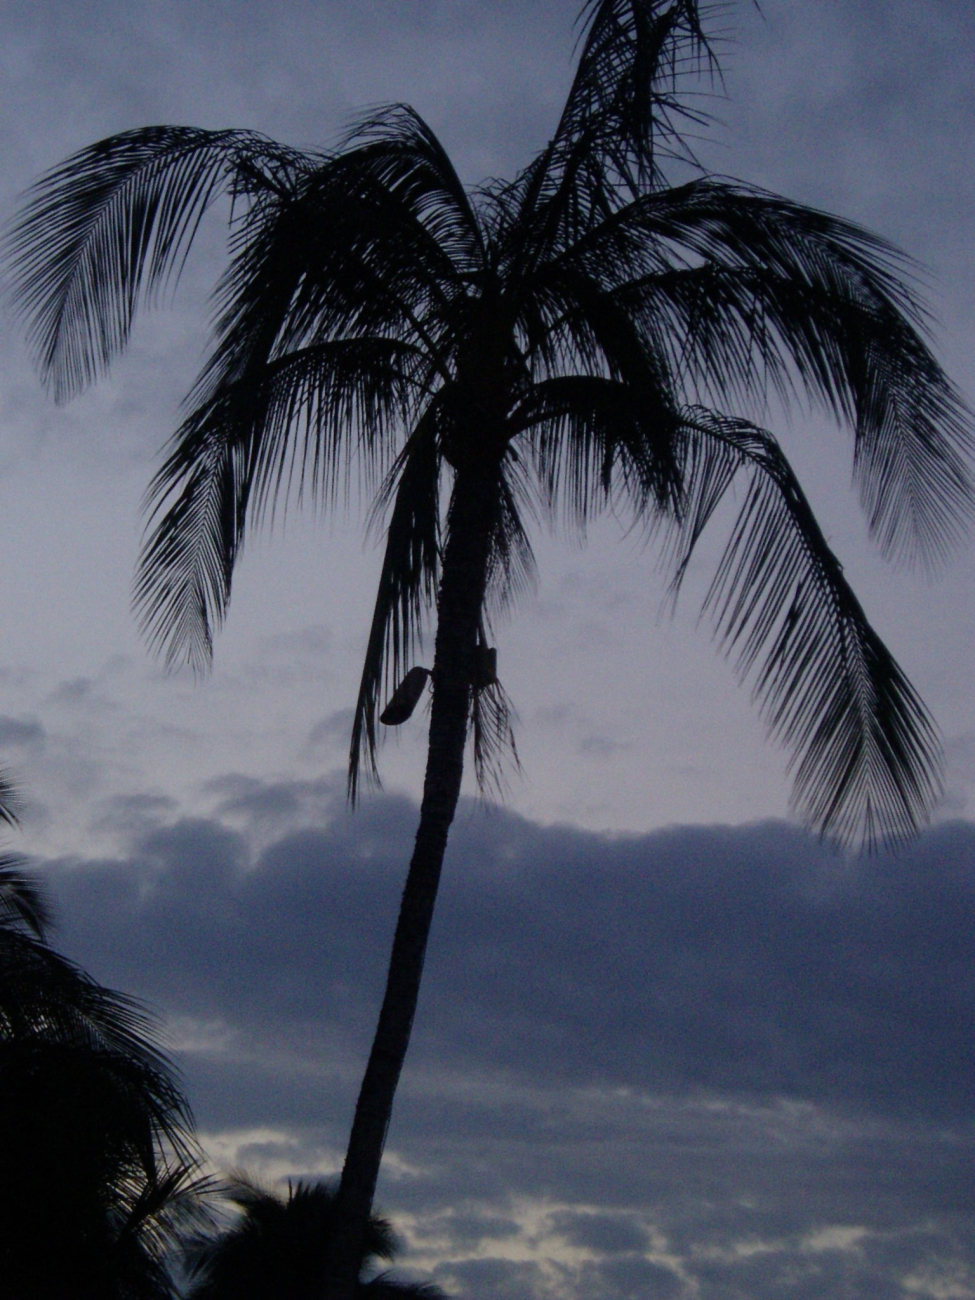 A palm tree silhouetted at dusk